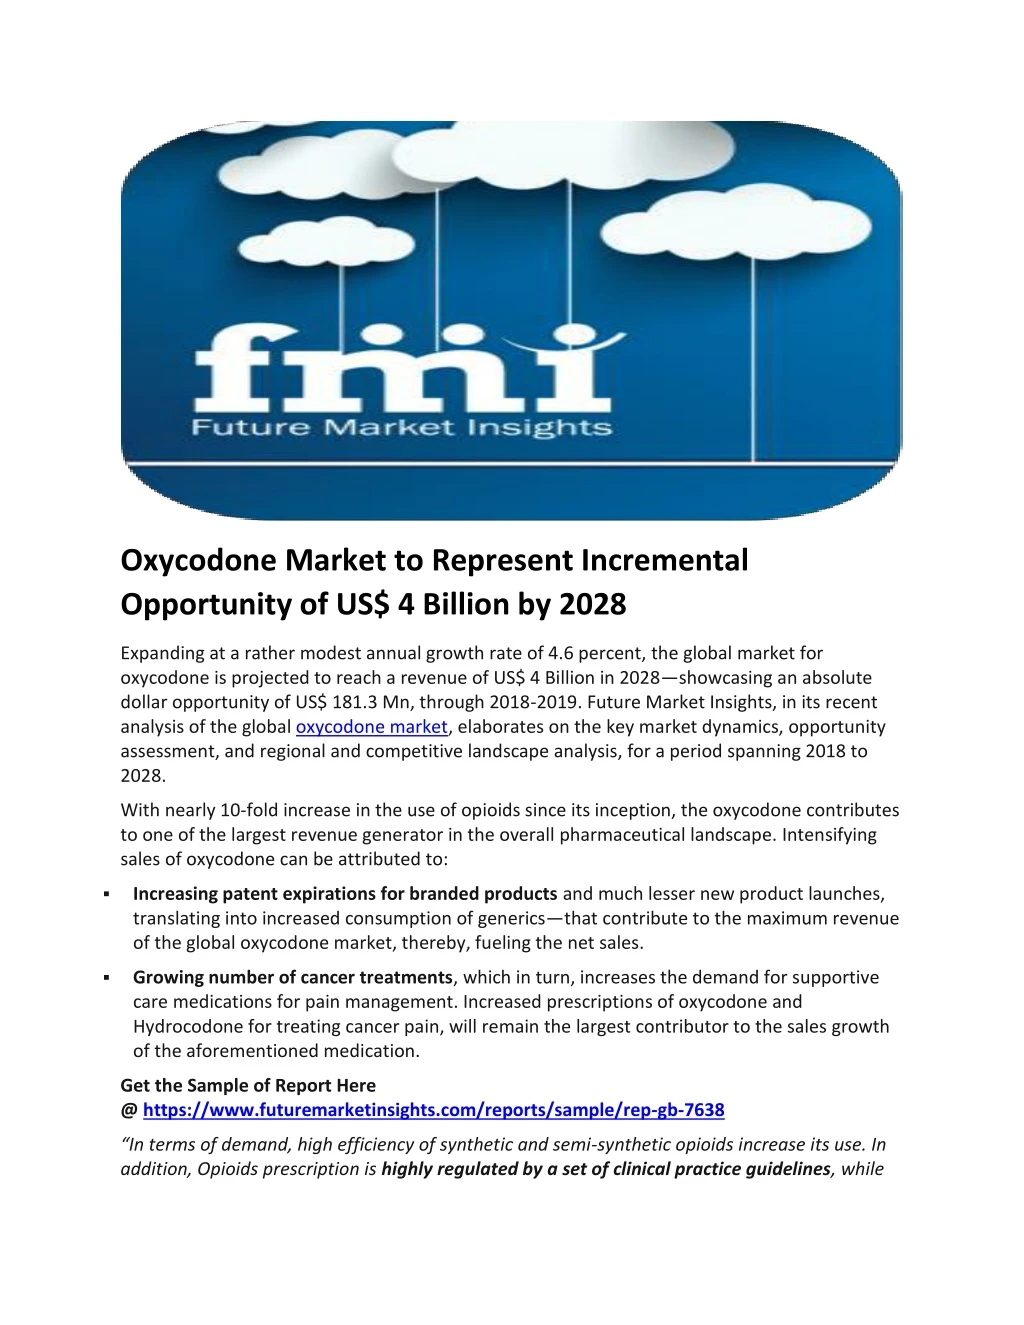 oxycodone market to represent incremental